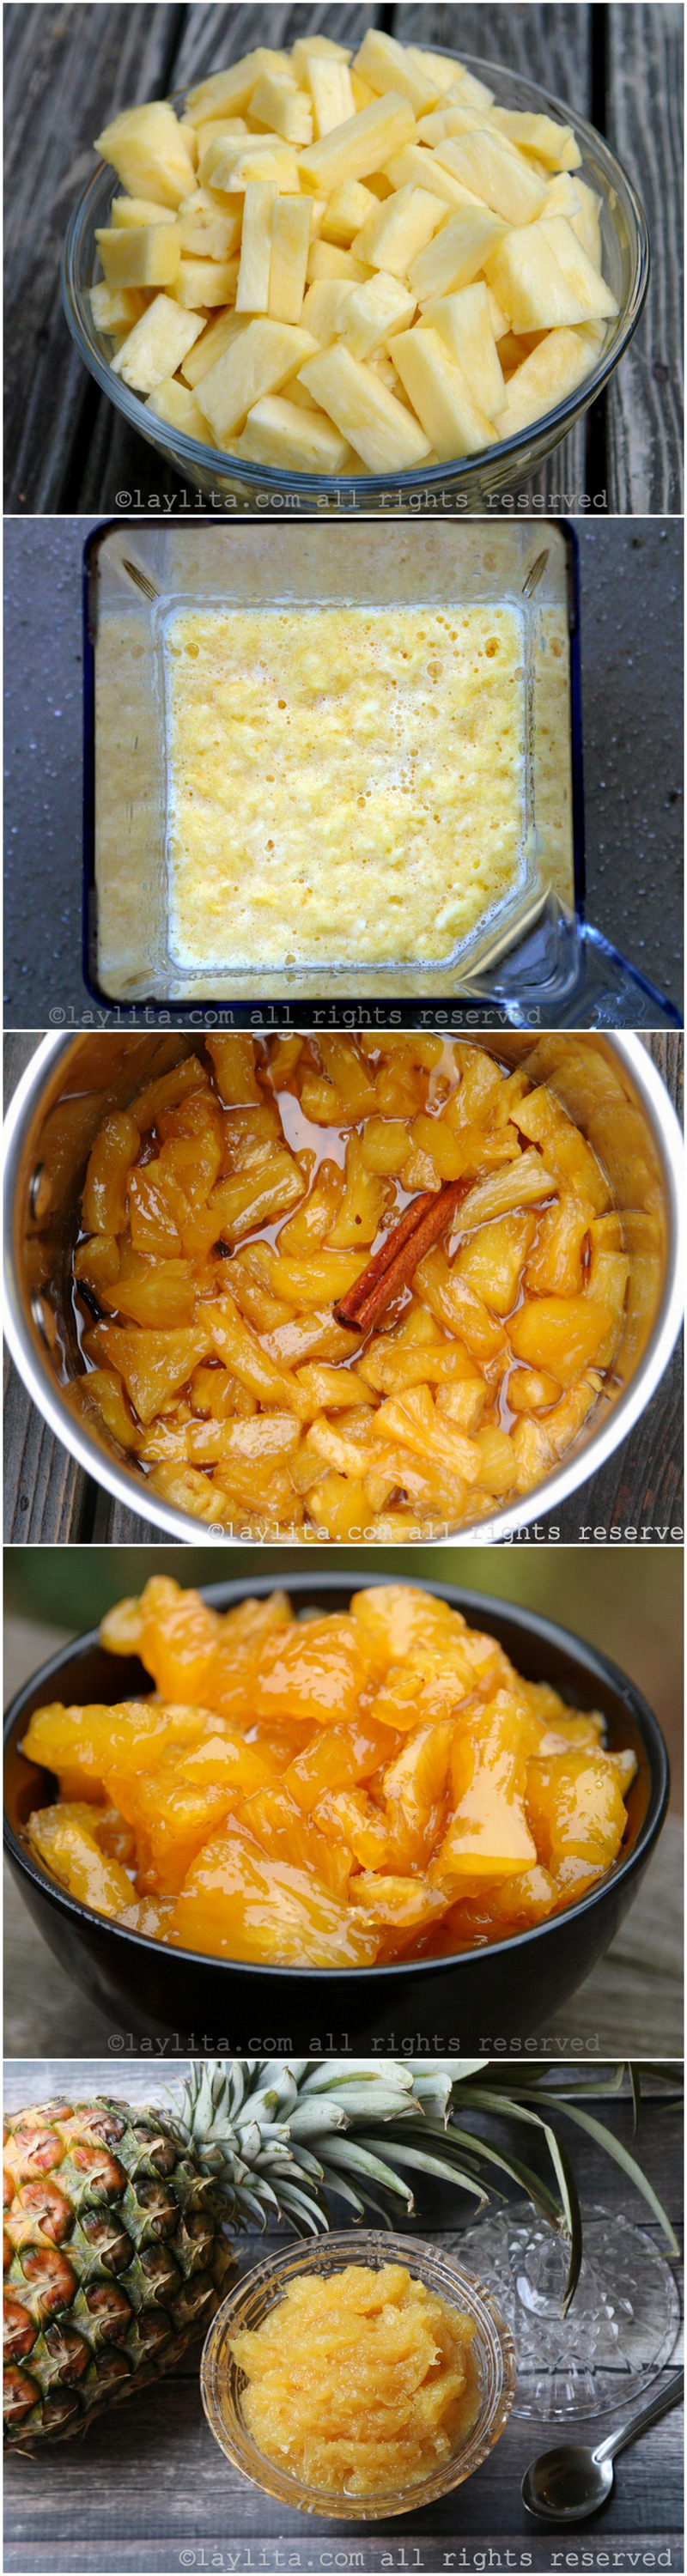 How to make pineapple marmalade or preserves